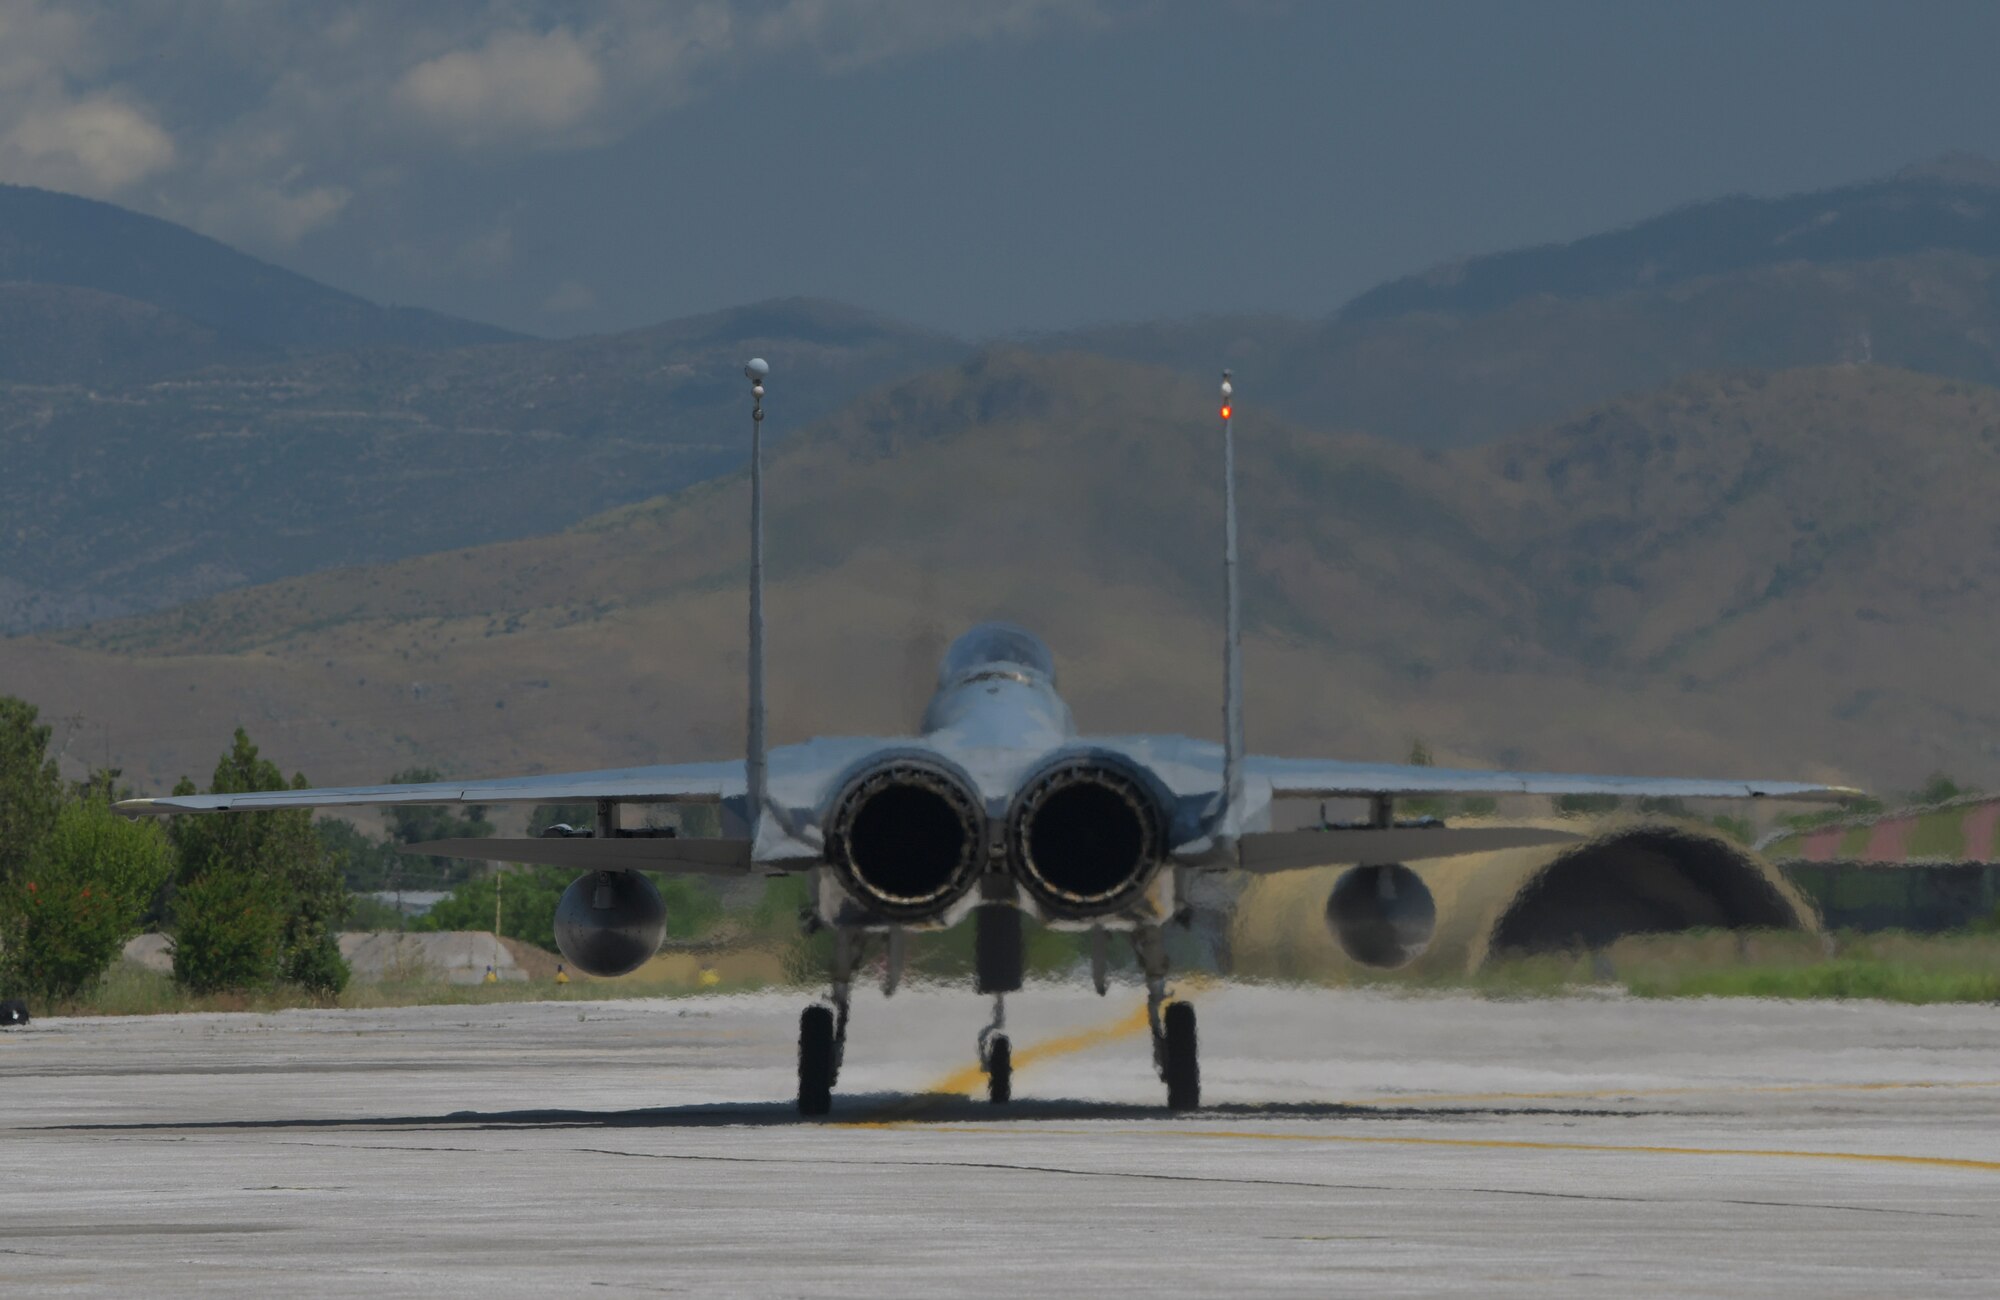 A U.S. Air Force F-15C Eagle assigned to the 493th Fighter Squadron taxis after a sortie during exercise Astral Knight 21 at Larissa Air Base, Greece, May 17, 2021. U.S. forces routinely train with allied nations to ensure the ready capability, strength and commitment of those partnerships to deter and defend against emerging adversaries. (U.S. Air Force photo by Tech. Sgt. Alex Fox Echols III)